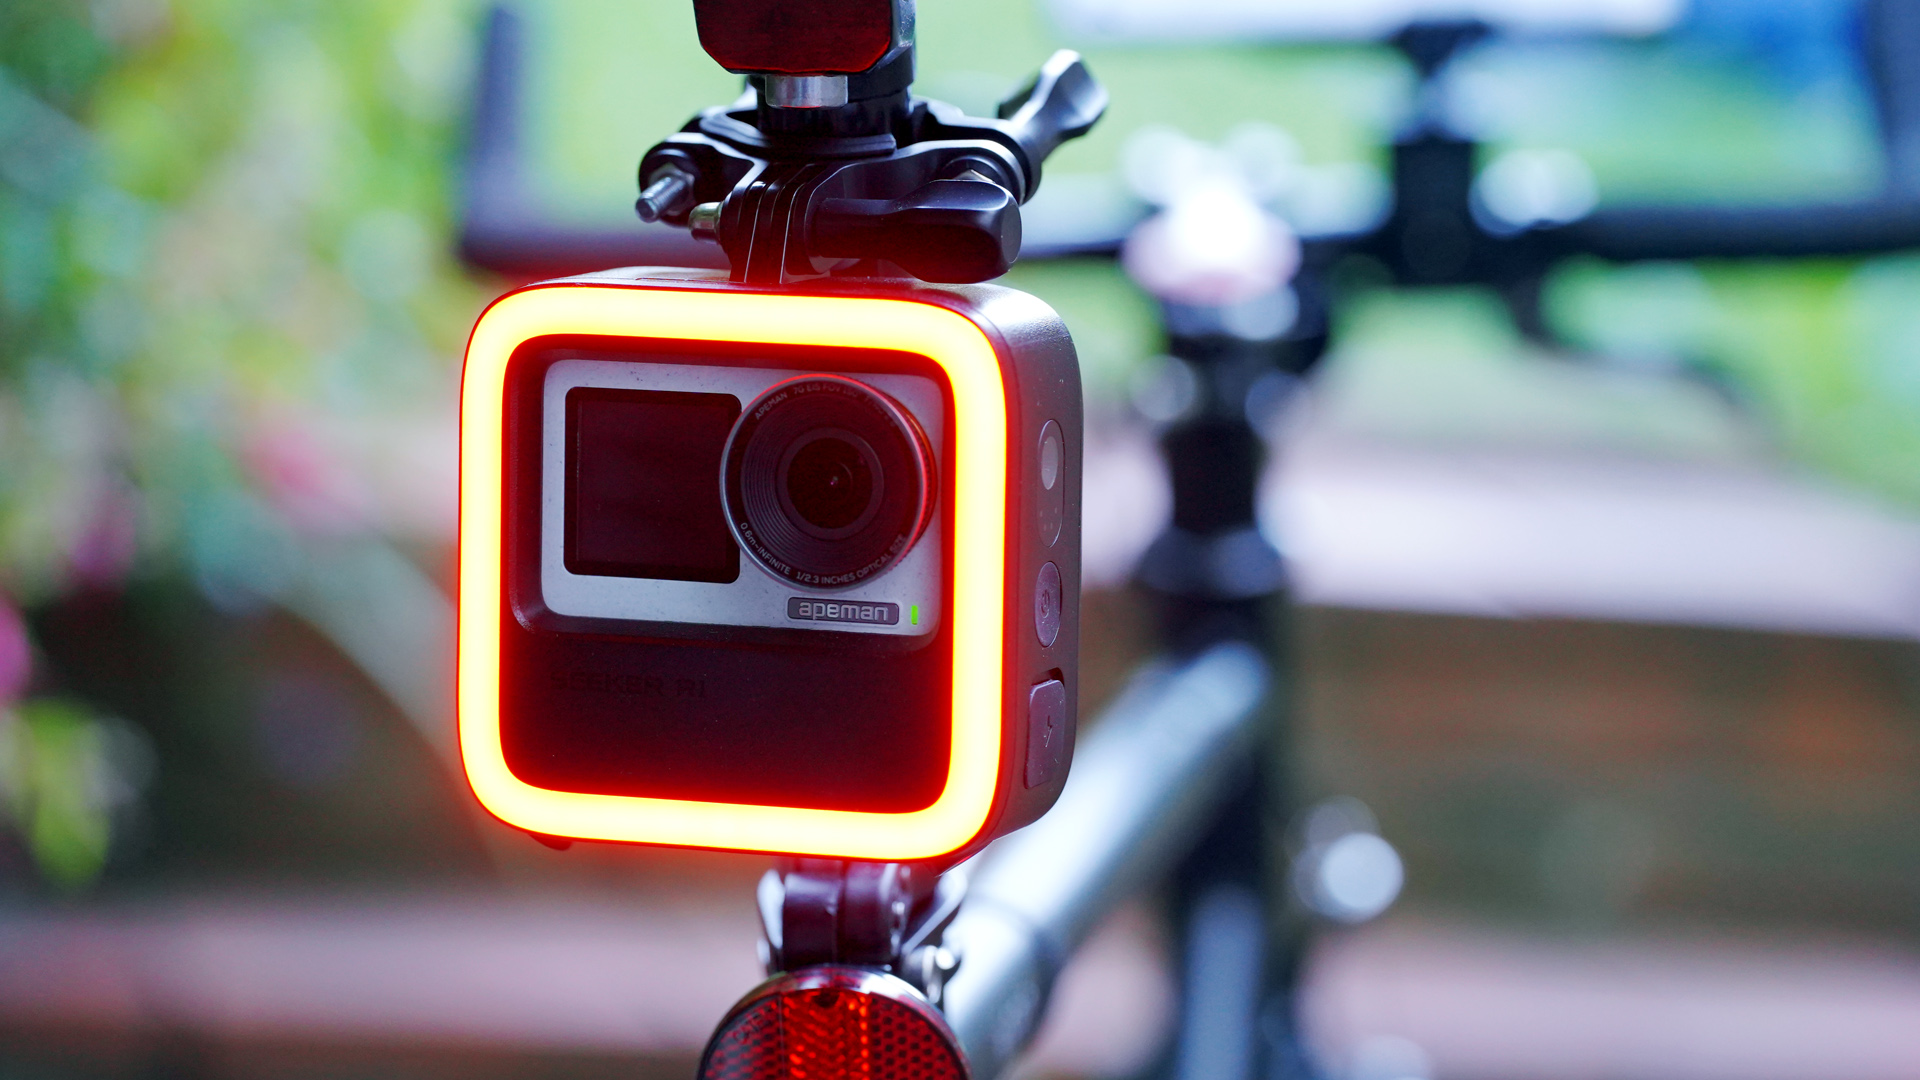 SEEKER Cycling Camera, Light Up Your Own 'Cycle-Safe-Zone' by